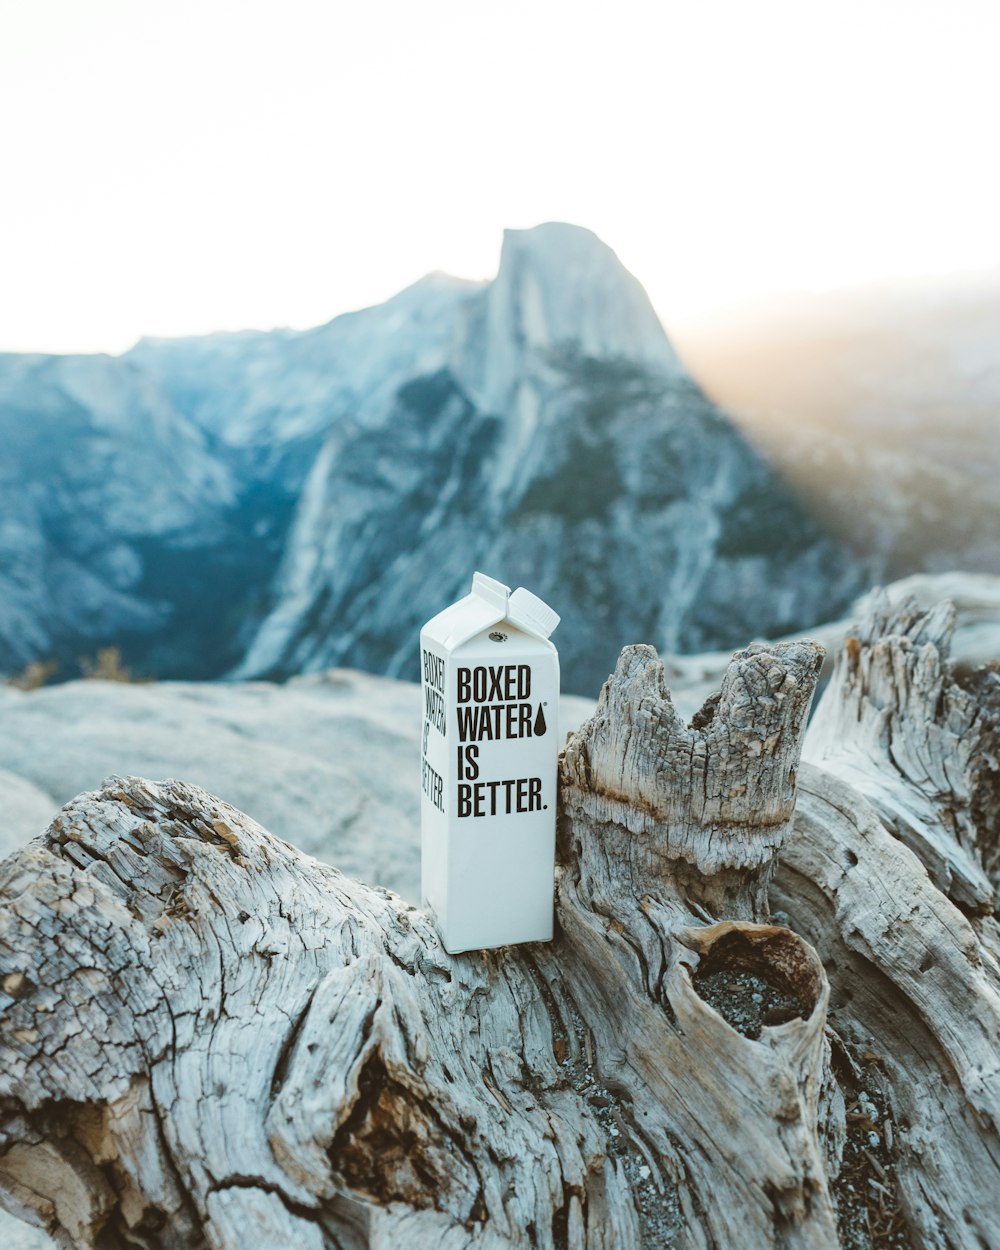 A white carton of Boxed Water on brown wood bark in front of Half Dome in Yosemite